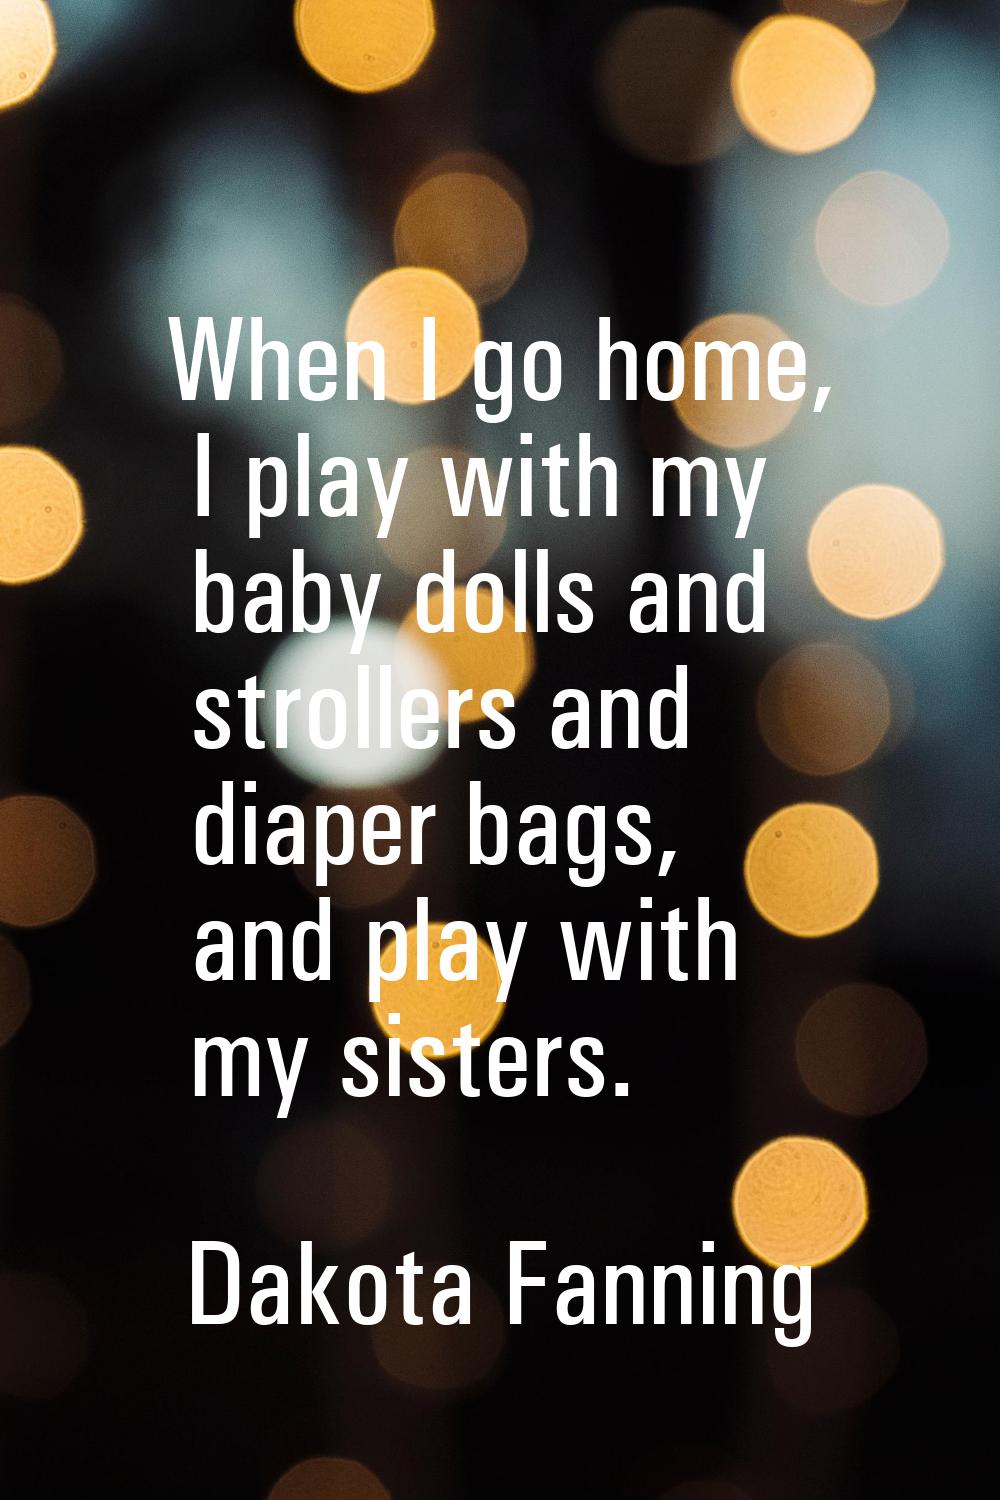 When I go home, I play with my baby dolls and strollers and diaper bags, and play with my sisters.